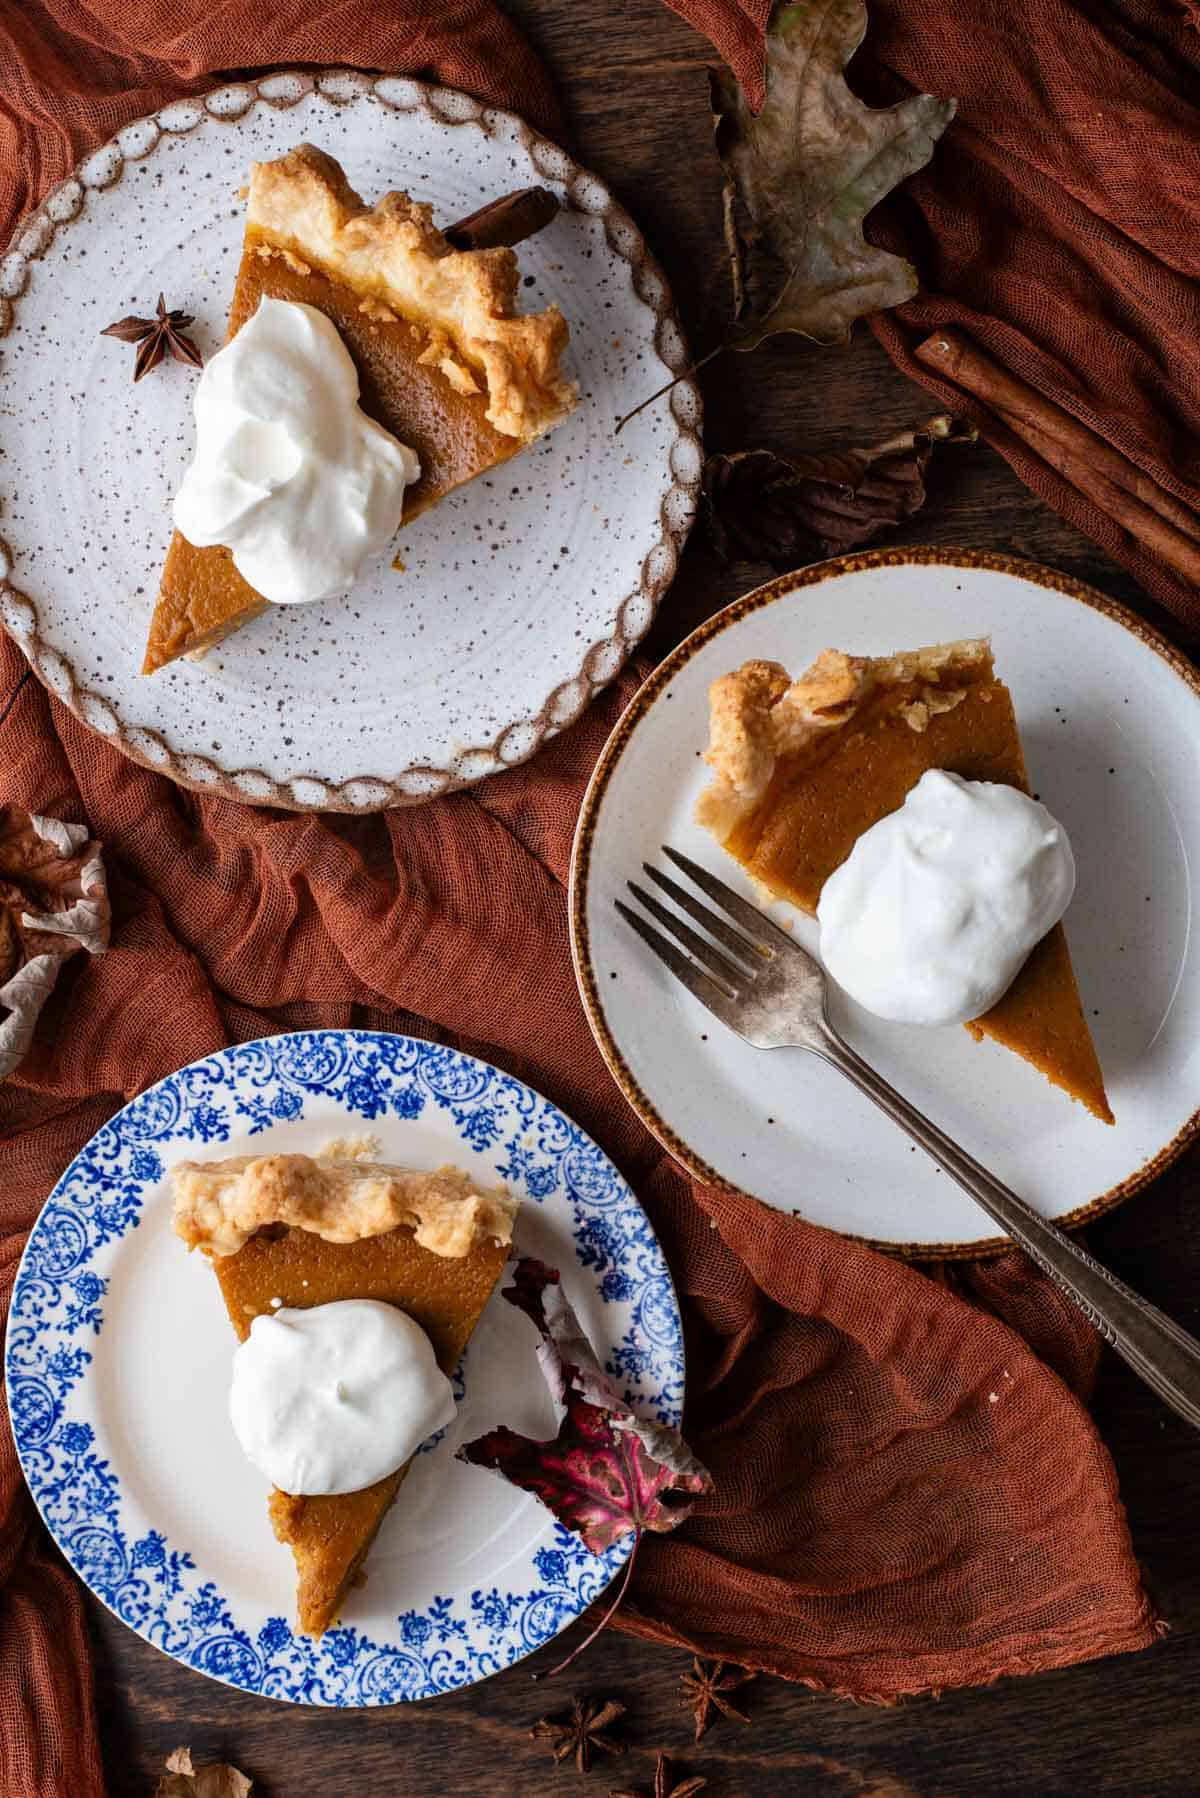 three small plates sitting on a wood surface with a dark orange cloth and fall leaves scattered around, with slices of pumpkin pie on them topped with a dollop of whipped cream, and a fork on the middle plate